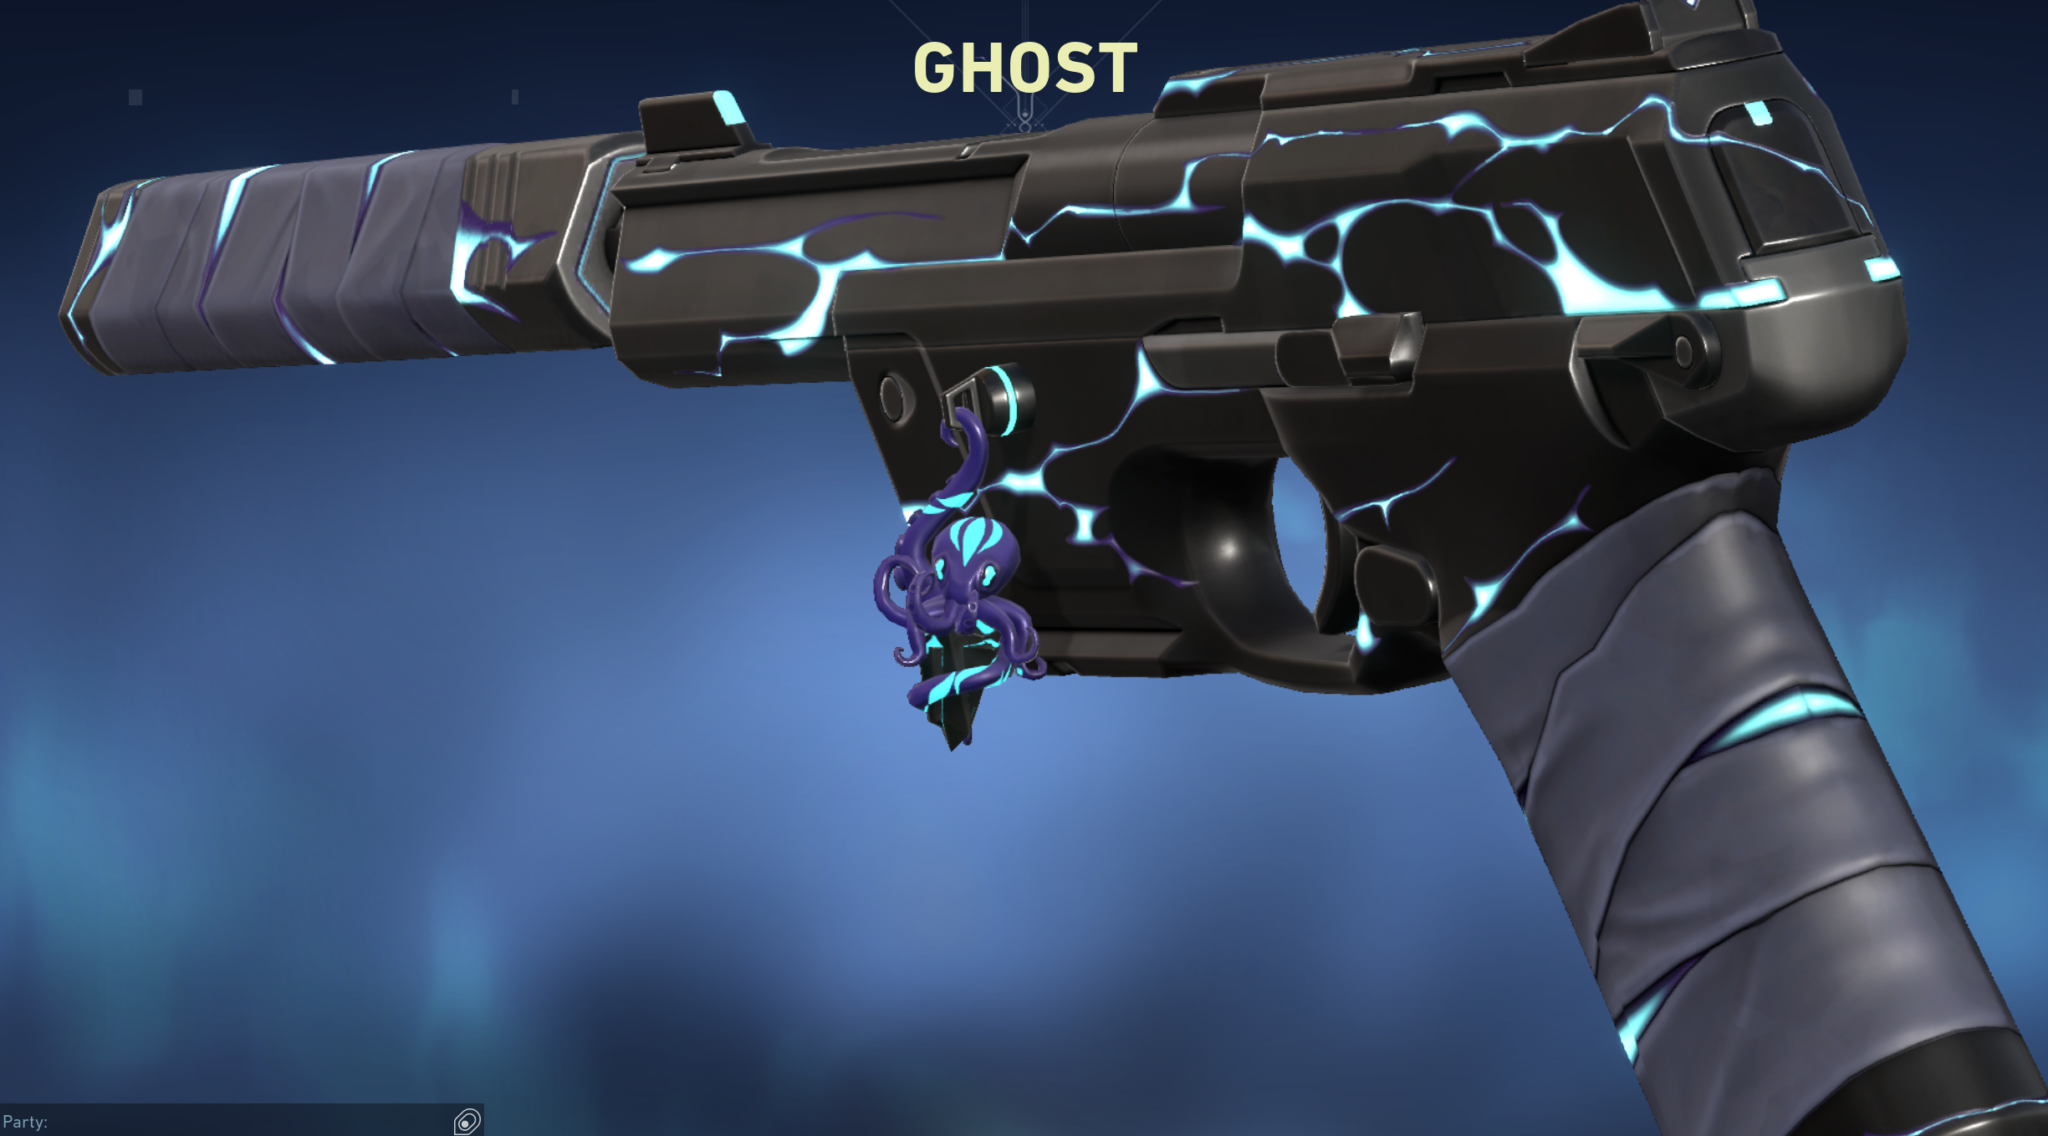 The octopus gun buddy in VALORANT's Act 3 battle pass changes colors